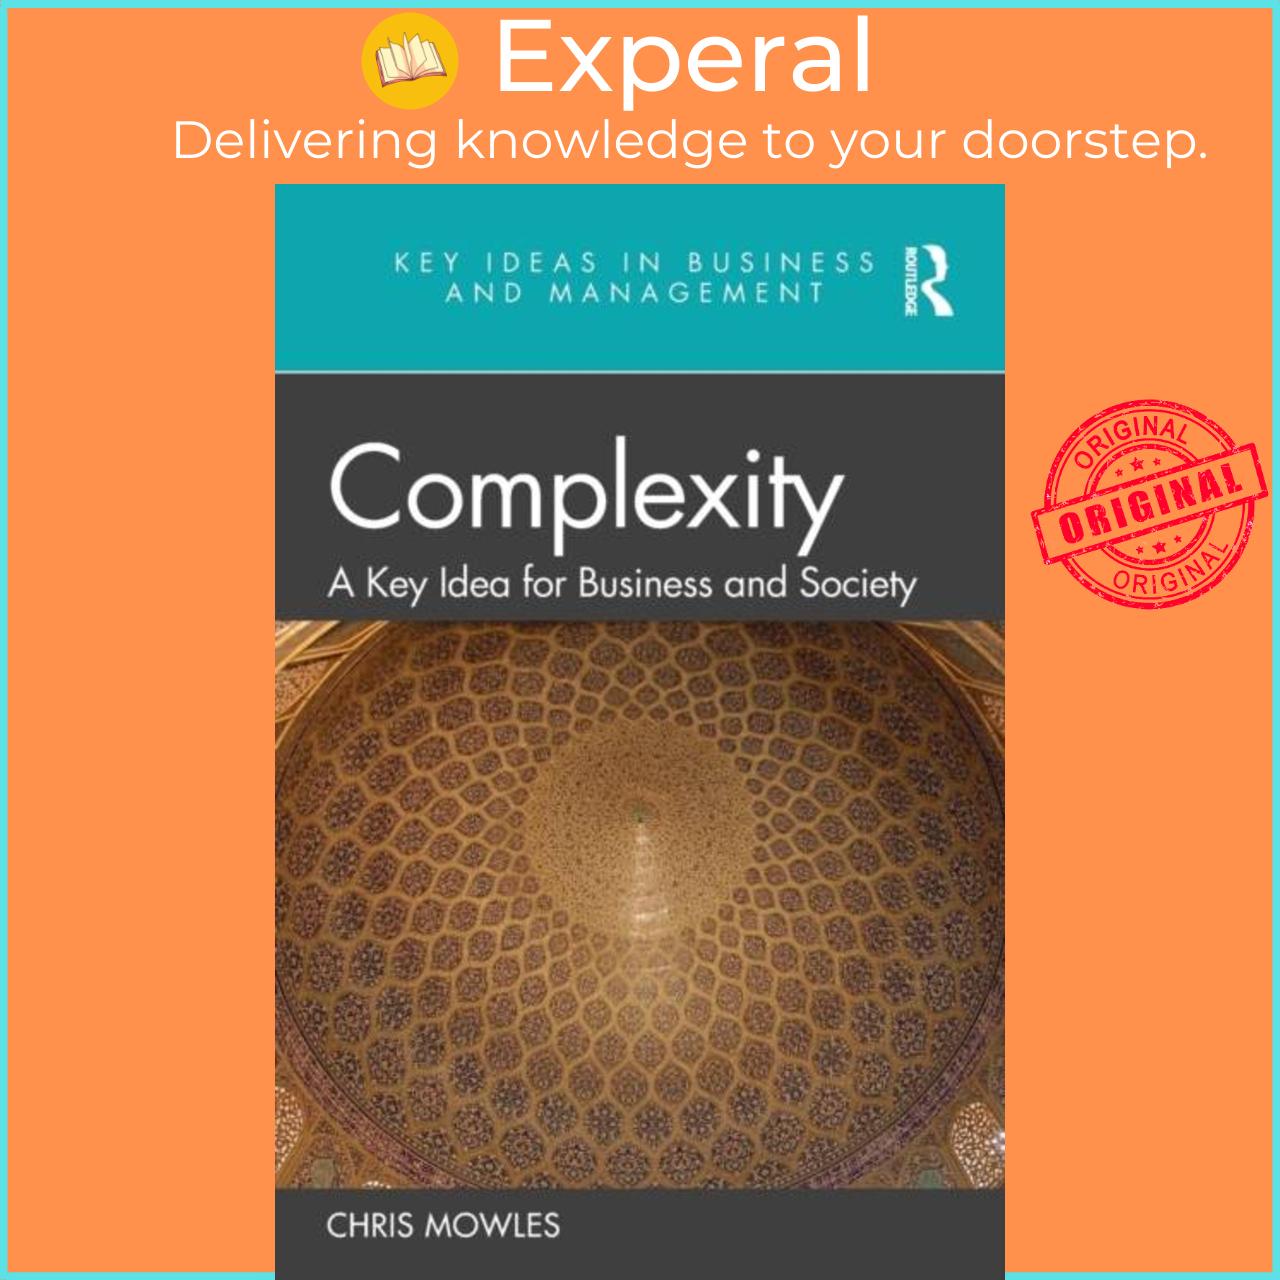 Sách - Complexity - A Key Idea for Business and Society by Chris Mowles (UK edition, paperback)